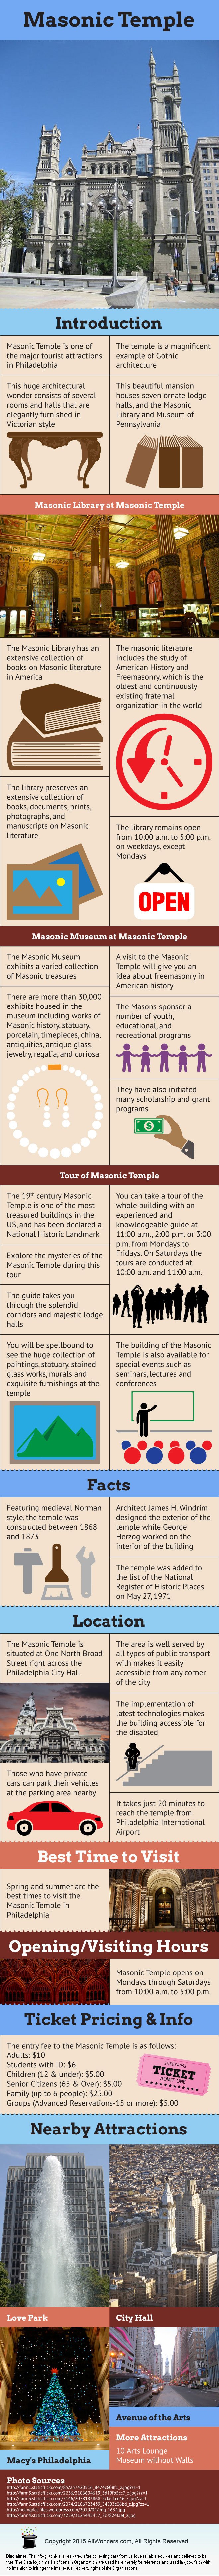 What is Masonic Temple - All About Masonic Temple [Infographic]